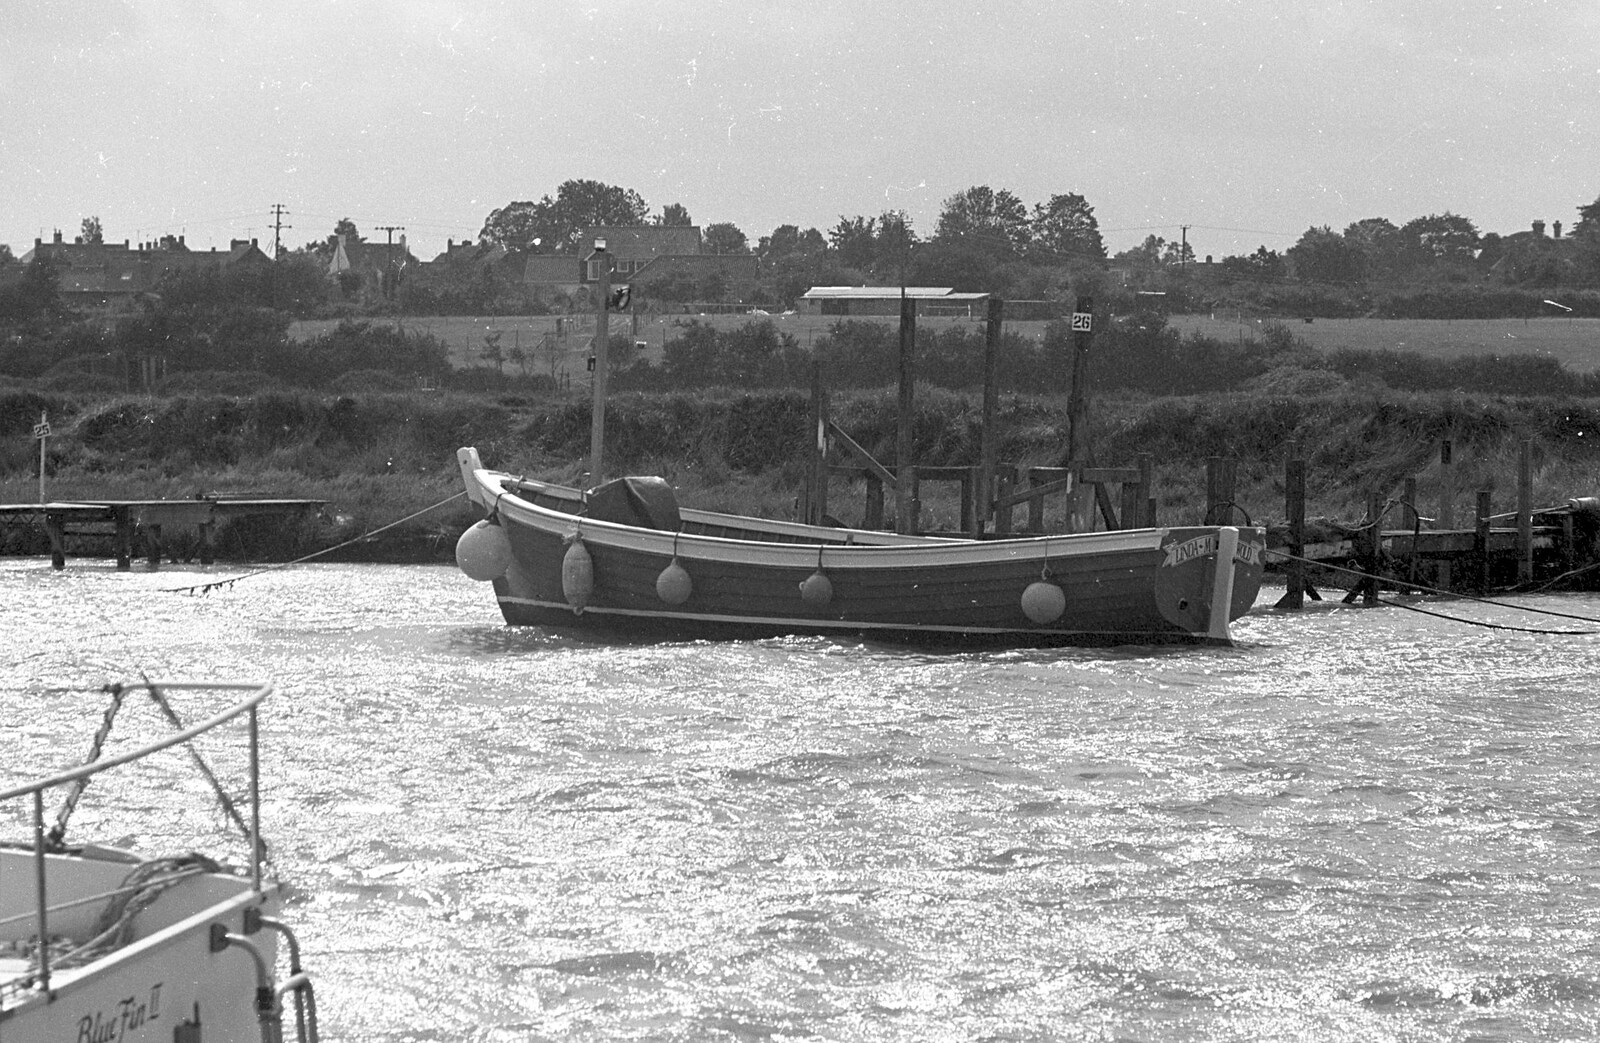 Blackshore Quay in Black and White, Southwold and Sizewell, Suffolk - 16th September 1992: The Linda M - Crispy's husband's boat